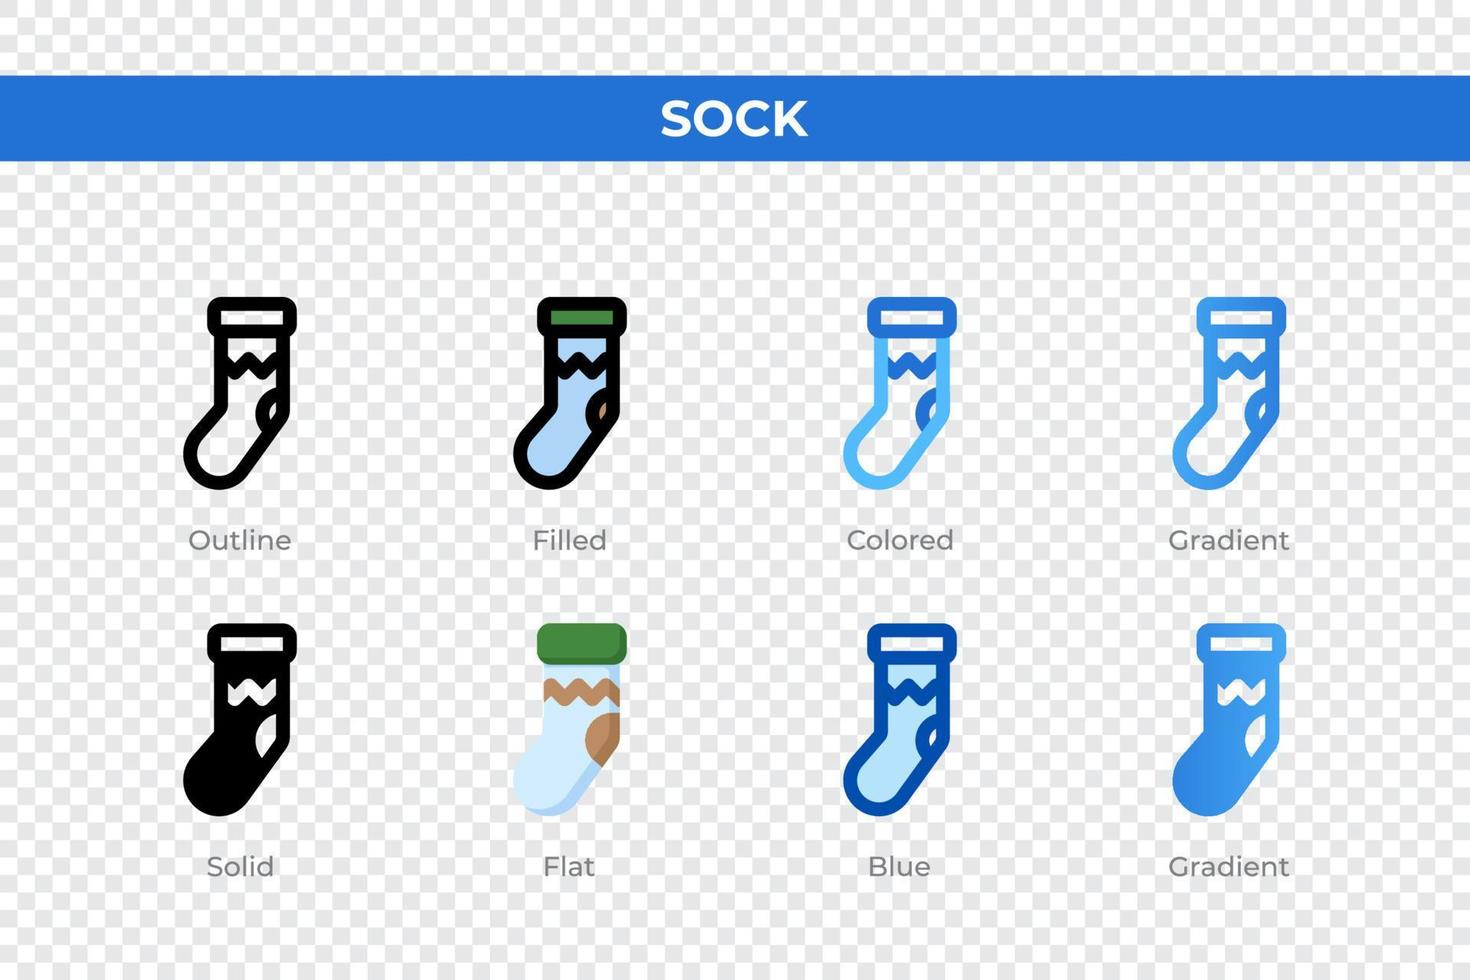 Sock icons in different style. Sock icons set. Holiday symbol. Different style icons set. Vector illustration